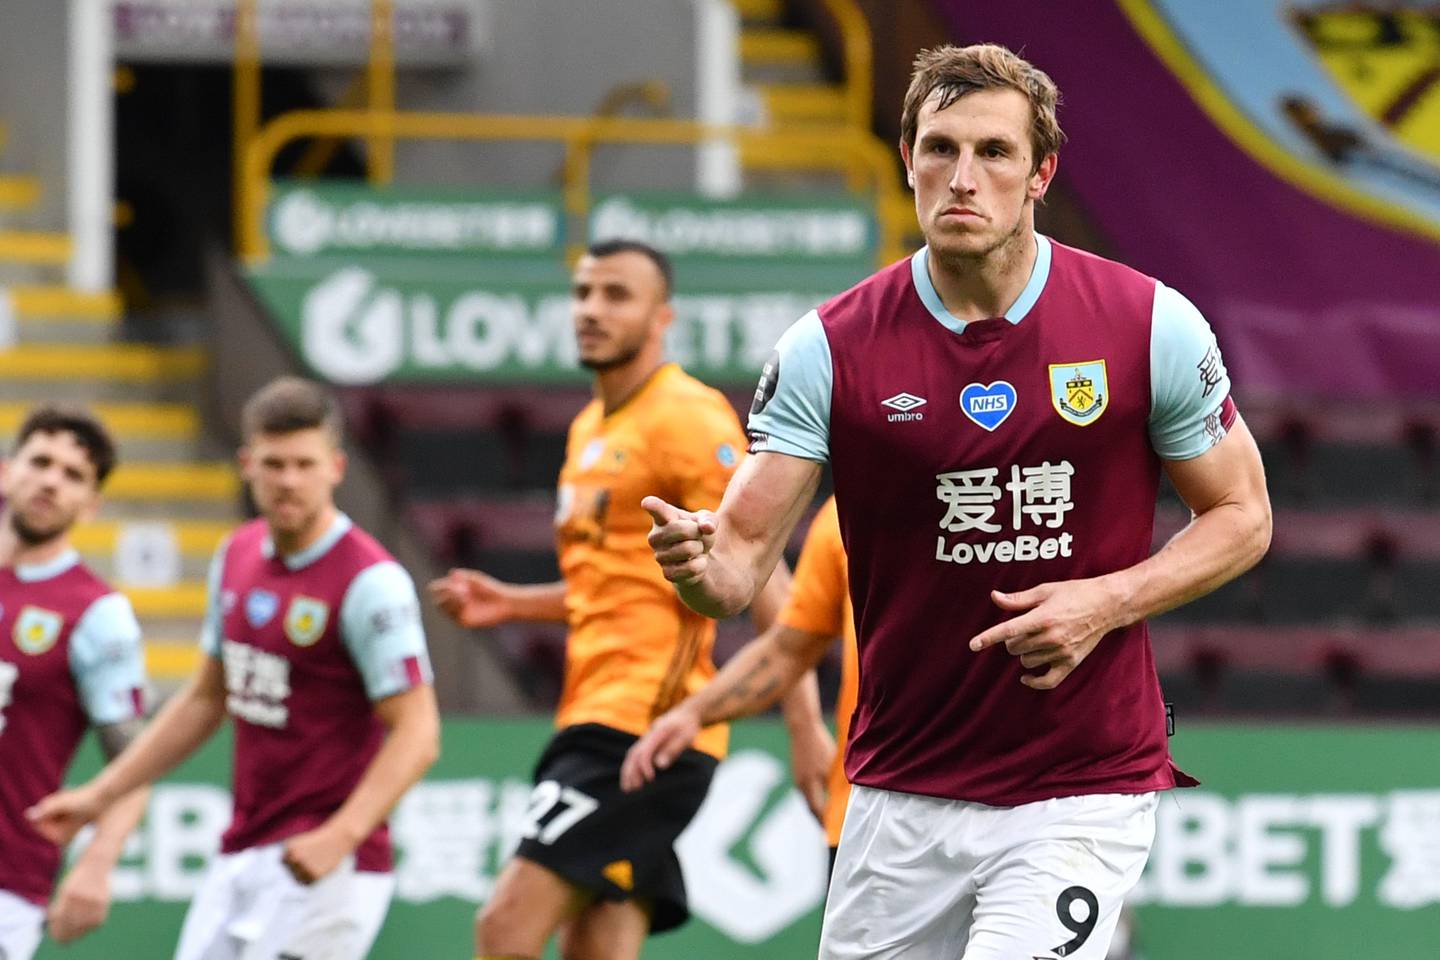 Burnley's New Zealand striker Chris Wood (R) celebrates after scoring a goal during the English Premier League football match between Burnley and Wolverhampton Wanderers at Turf Moor in Burnley, north-west England on July 15, 2020. (Photo by Paul ELLIS / POOL / AFP) / RESTRICTED TO EDITORIAL USE. No use with unauthorized audio, video, data, fixture lists, club/league logos or 'live' services. Online in-match use limited to 120 images. An additional 40 images may be used in extra time. No video emulation. Social media in-match use limited to 120 images. An additional 40 images may be used in extra time. No use in betting publications, games or single club/league/player publications. / 